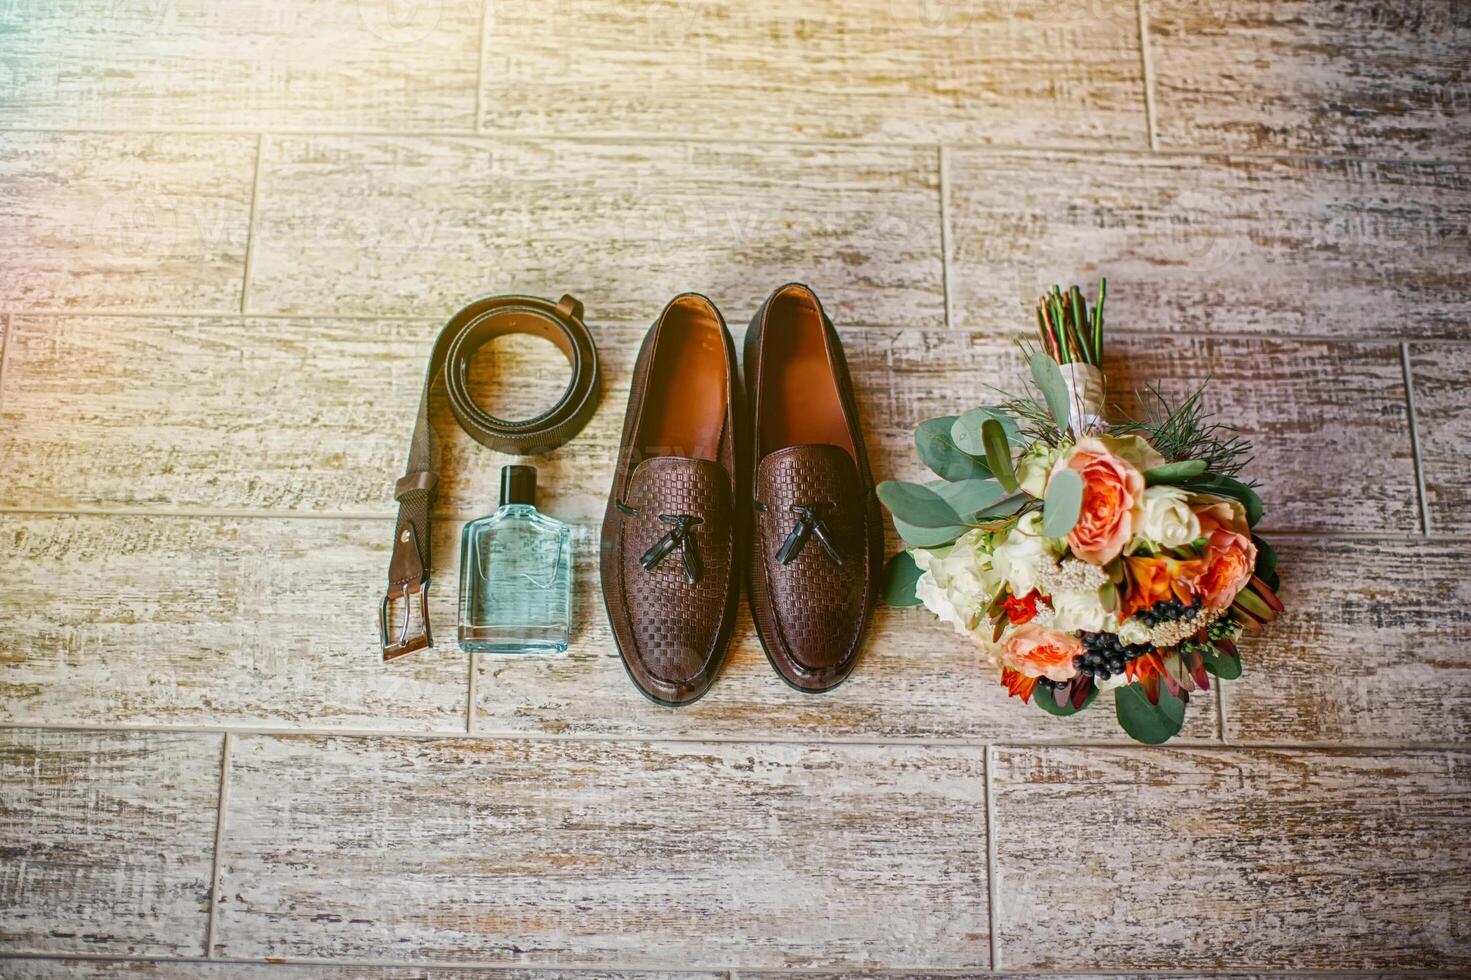 Wedding details. Accessories for the groom. Shoes, bouquet, belt, perfume photo